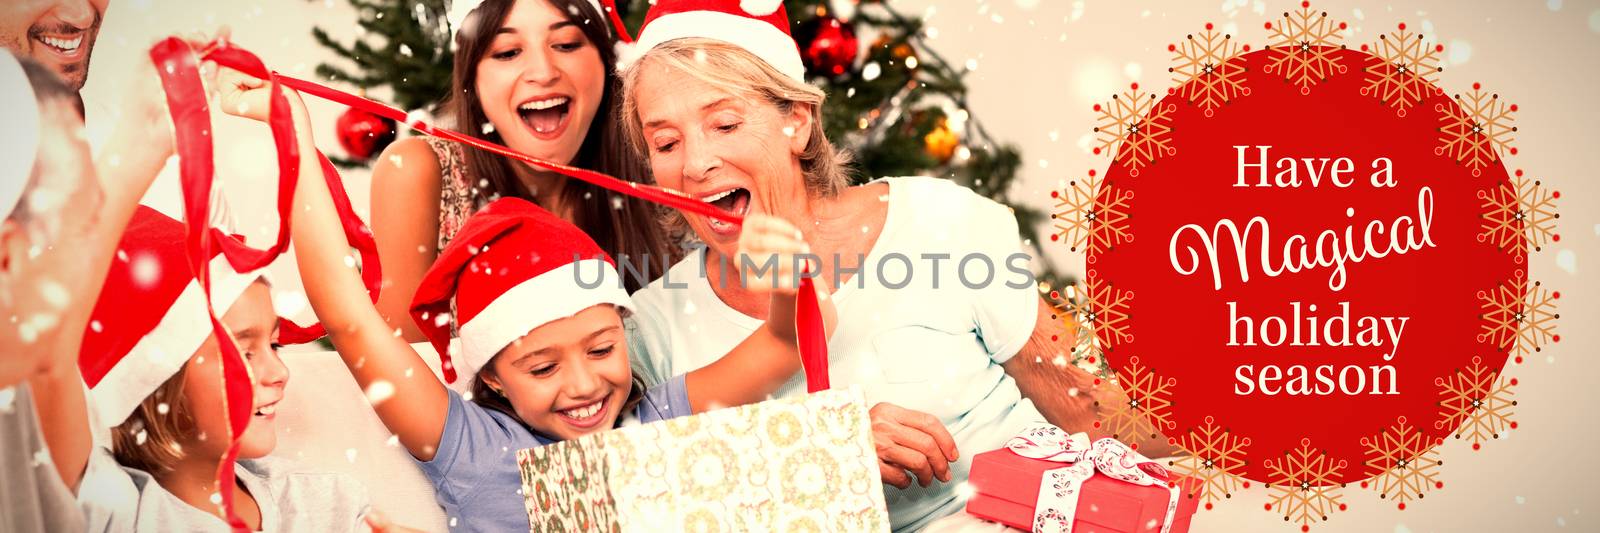 Happy family at christmas opening gifts together against white and red greetings card